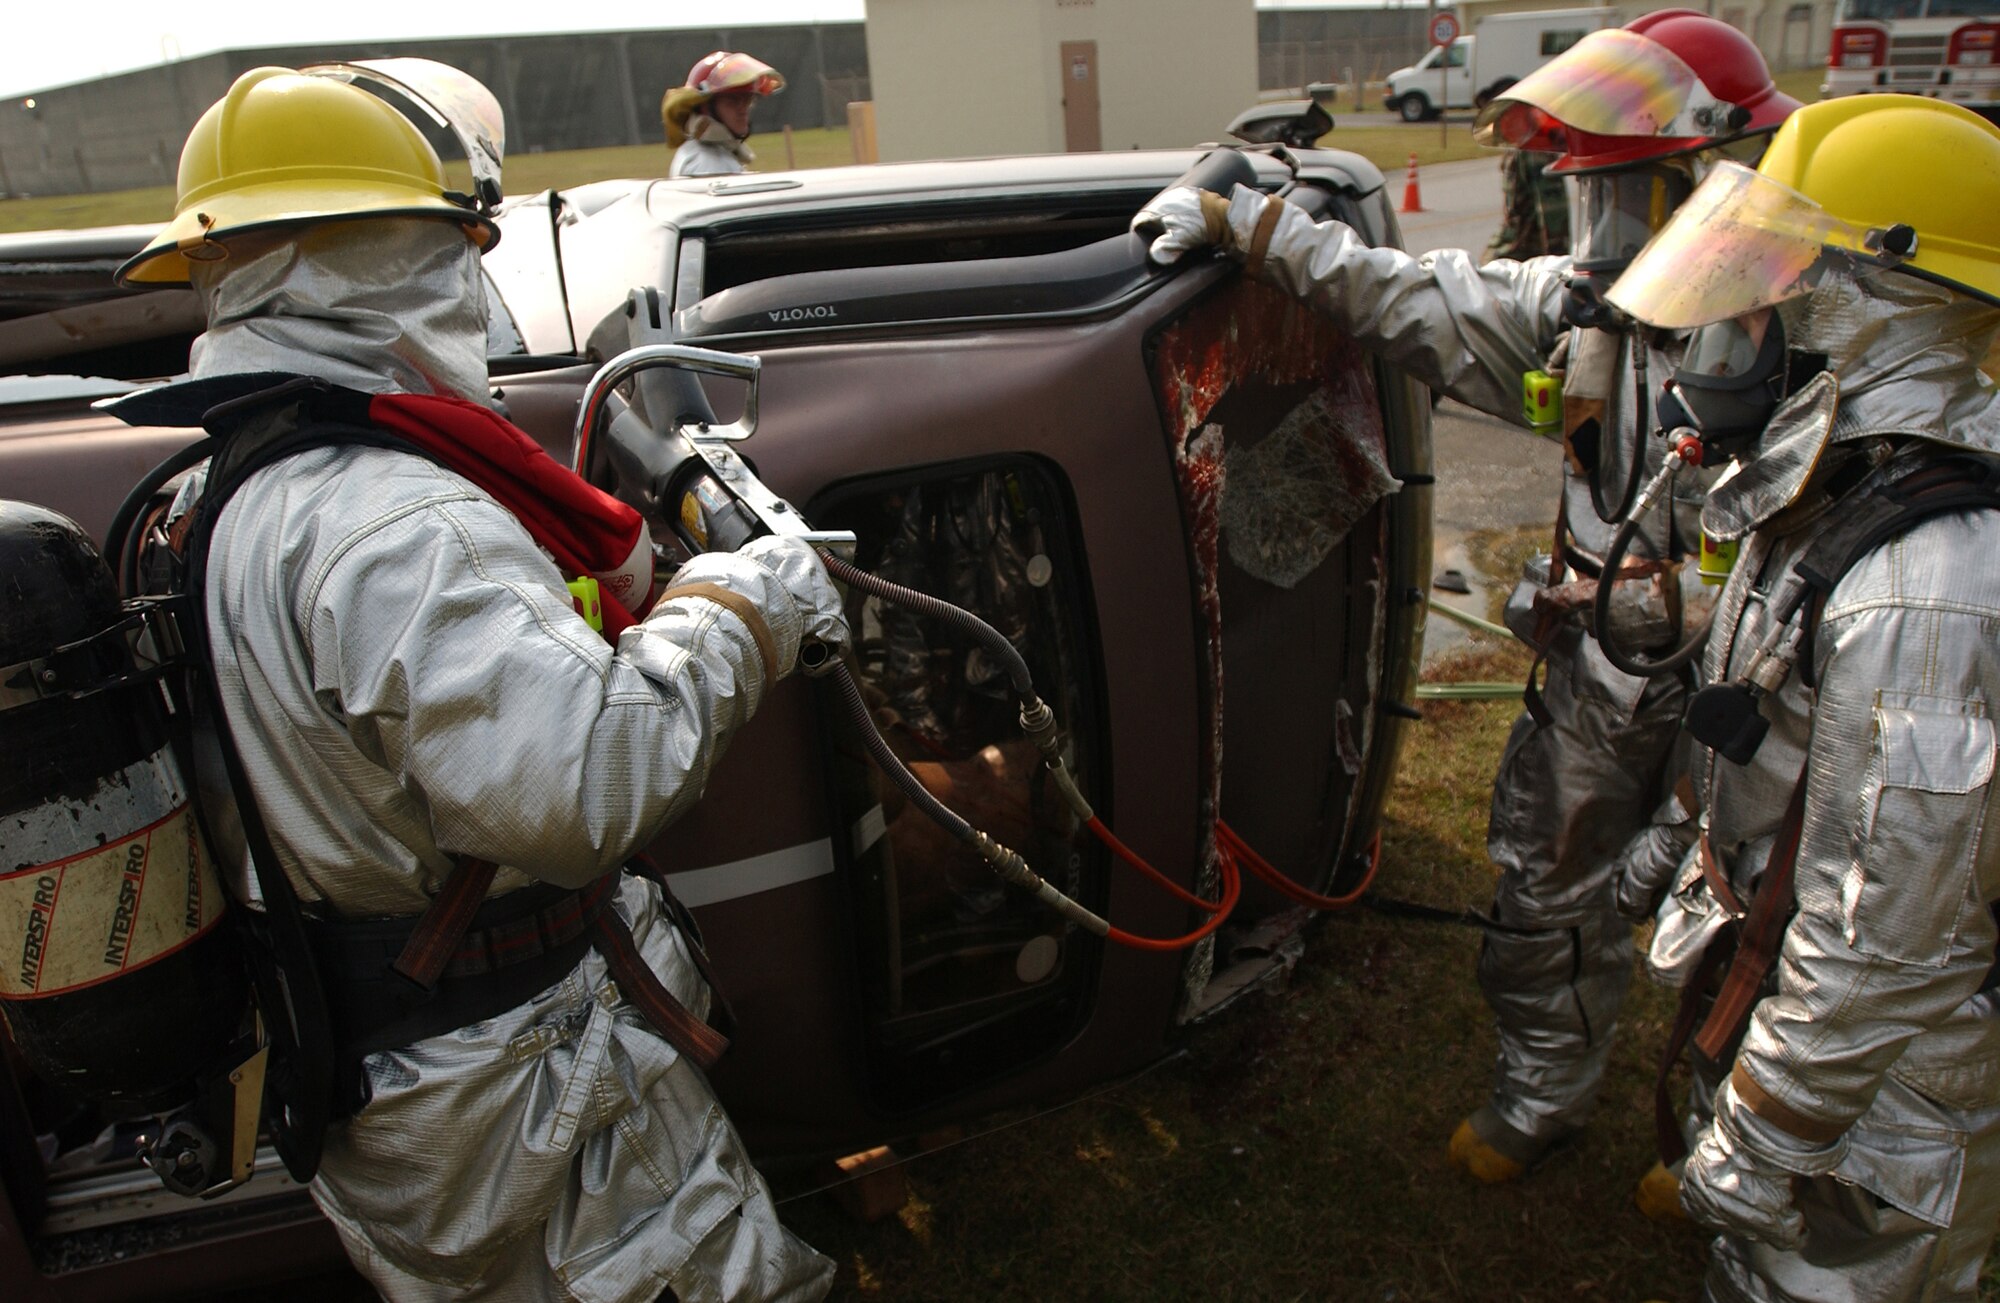 Airmen from the 18th Civil Engineer Squadron Fire Department pry open the roof of a vehicle to gain entry and help injured victims during a simulated collision of a van with a fuel truck during Local Operational Readiness Exercise Beverly High 08-2 at Kadena Air Base, Japan, Dec. 3, 2007. These scenarios enable base agencies to work together, mitigate real-world situations, and heighten readiness capabilities.
(U.S. Air Force photo/Tech. Sgt. Rey Ramon)
